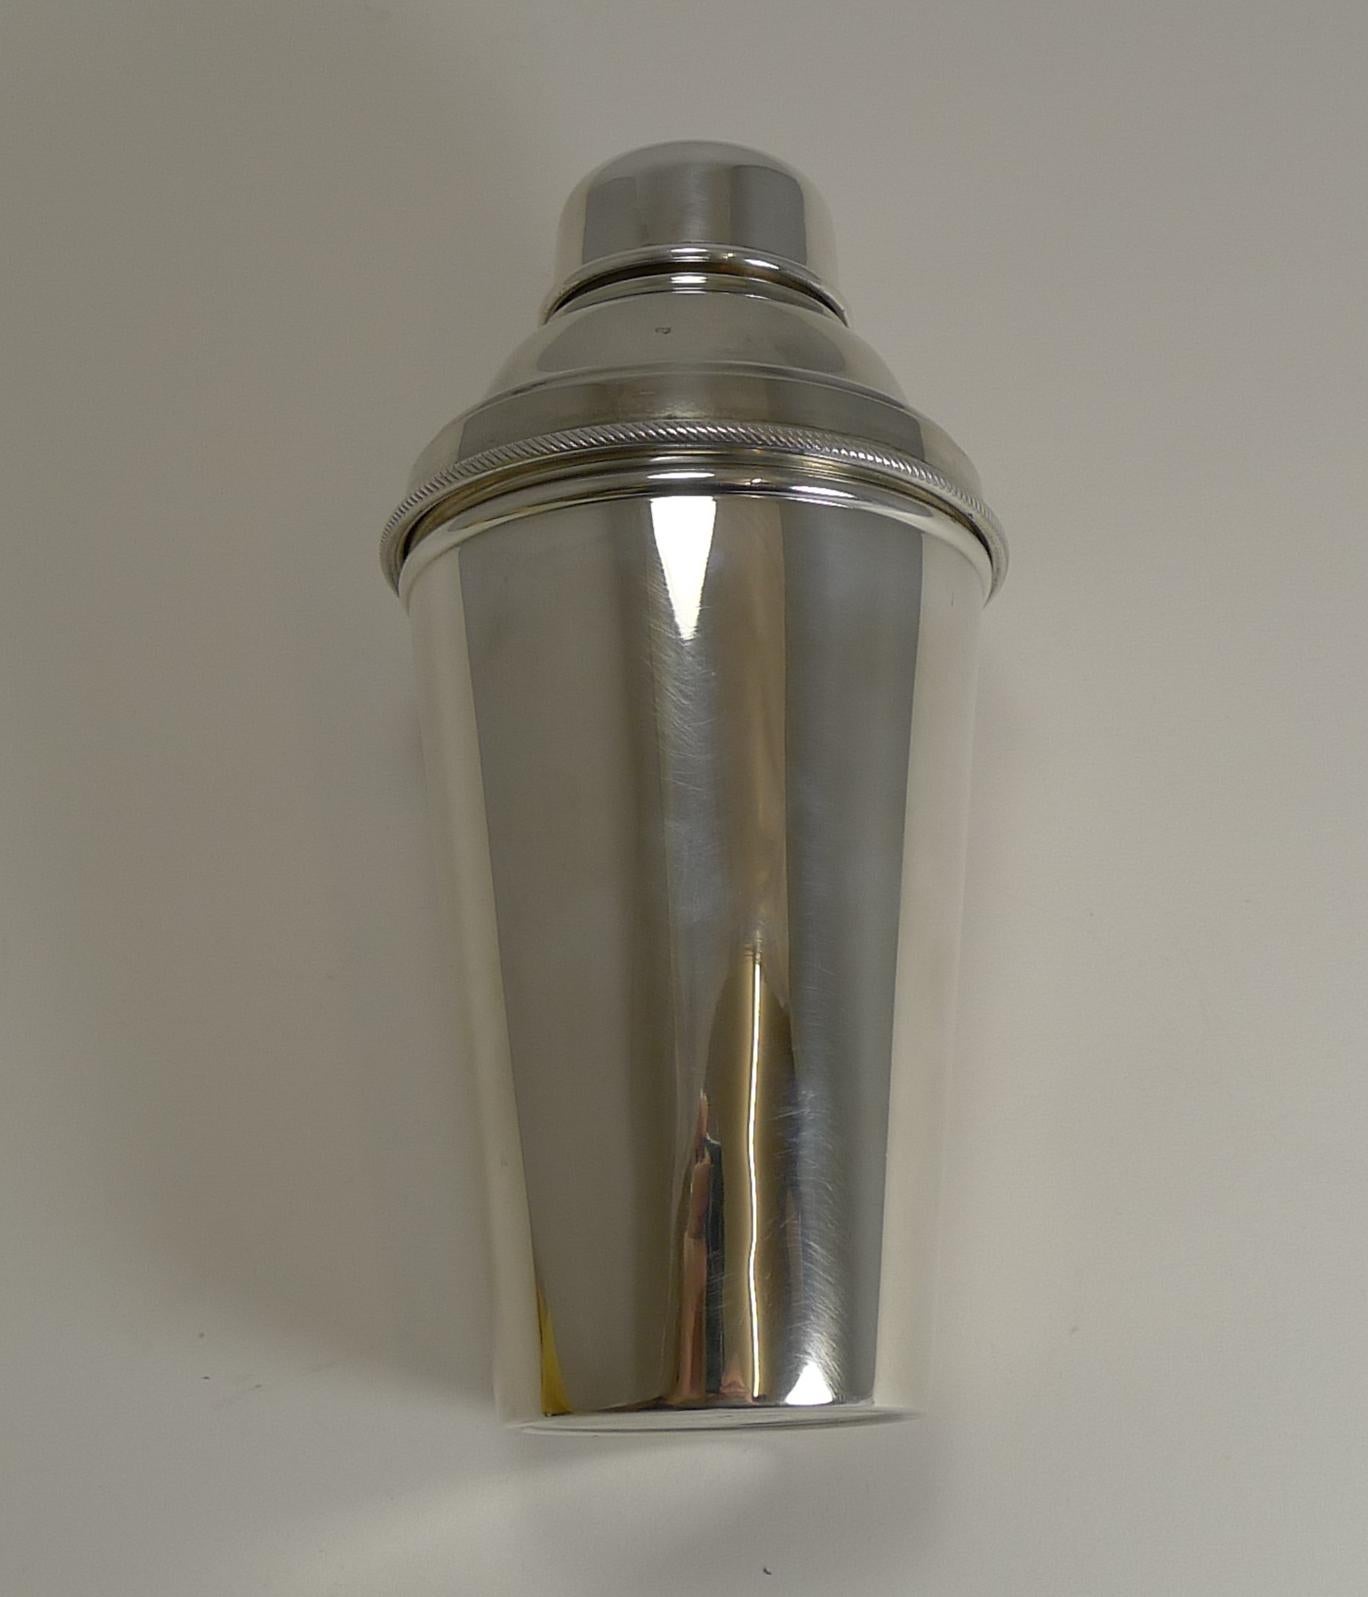 A wonderful one pint Cocktail Shaker in silverplate. Highly desirable, this one has an integral ice breaker which is revealed once the upper portion is removed.

The underside is signed by the well renowned silversmith, James Dixon and Sons and